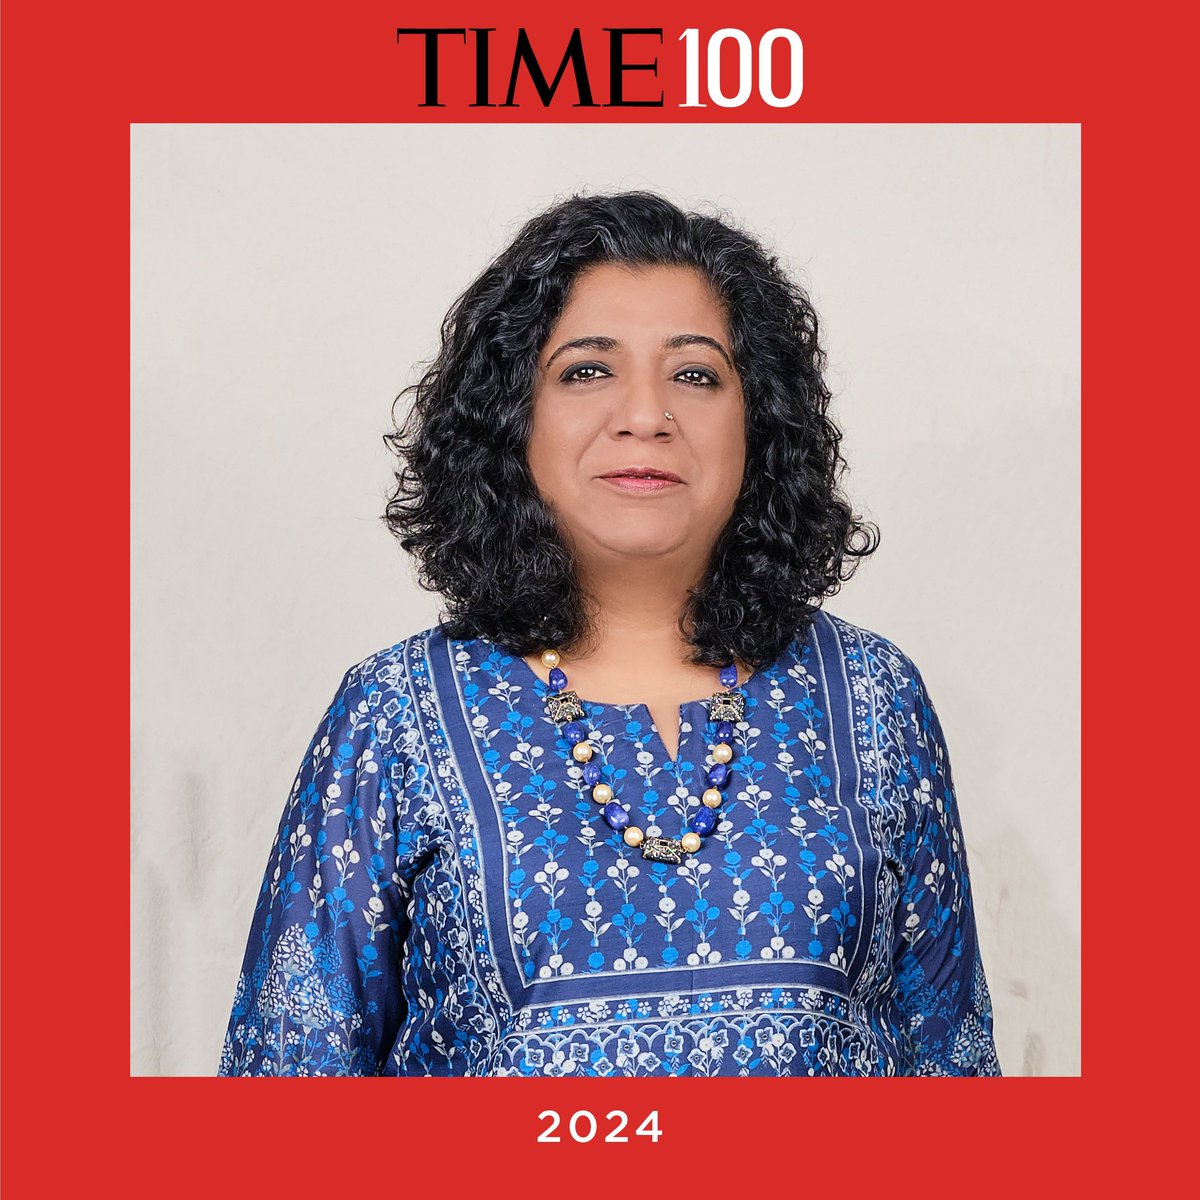 British chef @Asma_KhanLDN, born in India, has been recognised in @TIME’s list of the 100 Most Influential People in the world.

The proud Londoner runs the acclaimed all-female restaurant Darjeeling Express in the city and is a champion of women.

Congratulations, Asma 👏